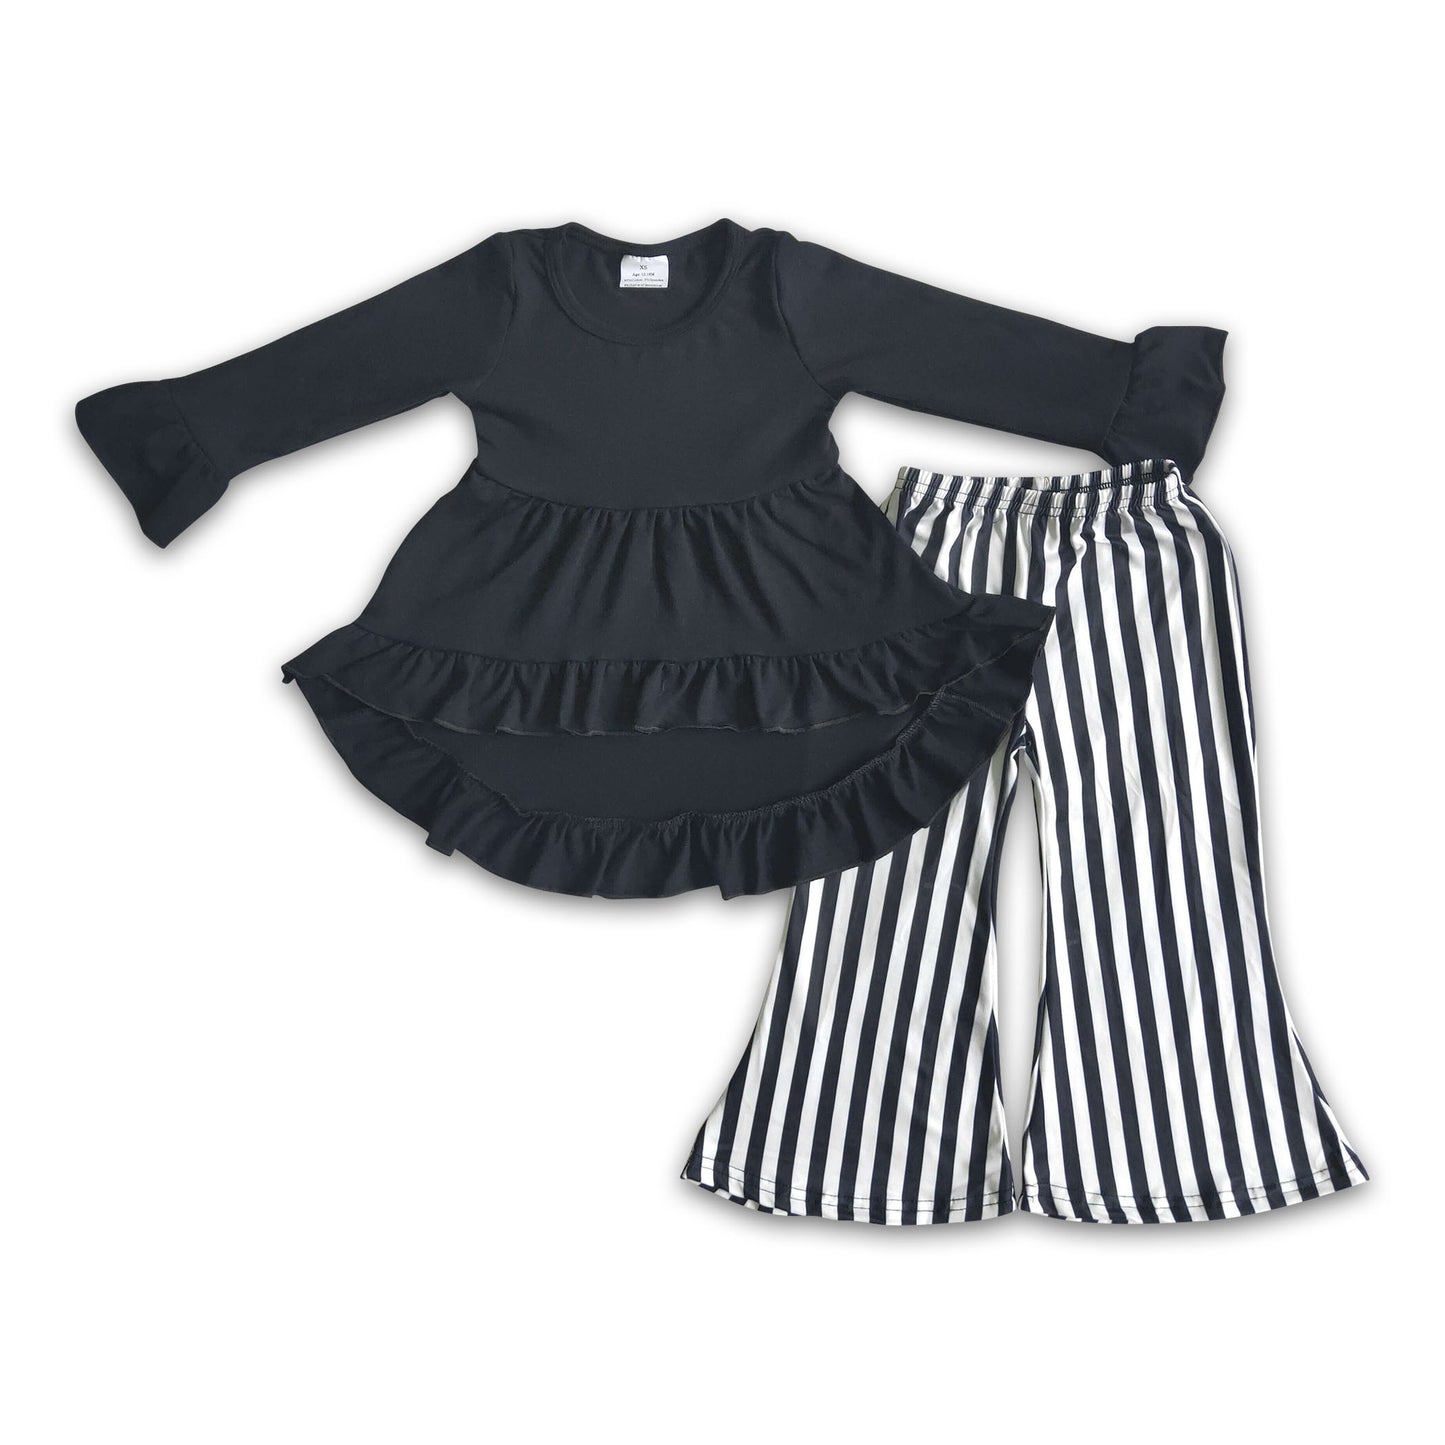 Black high low top match stripe pants girls fall winter outfits